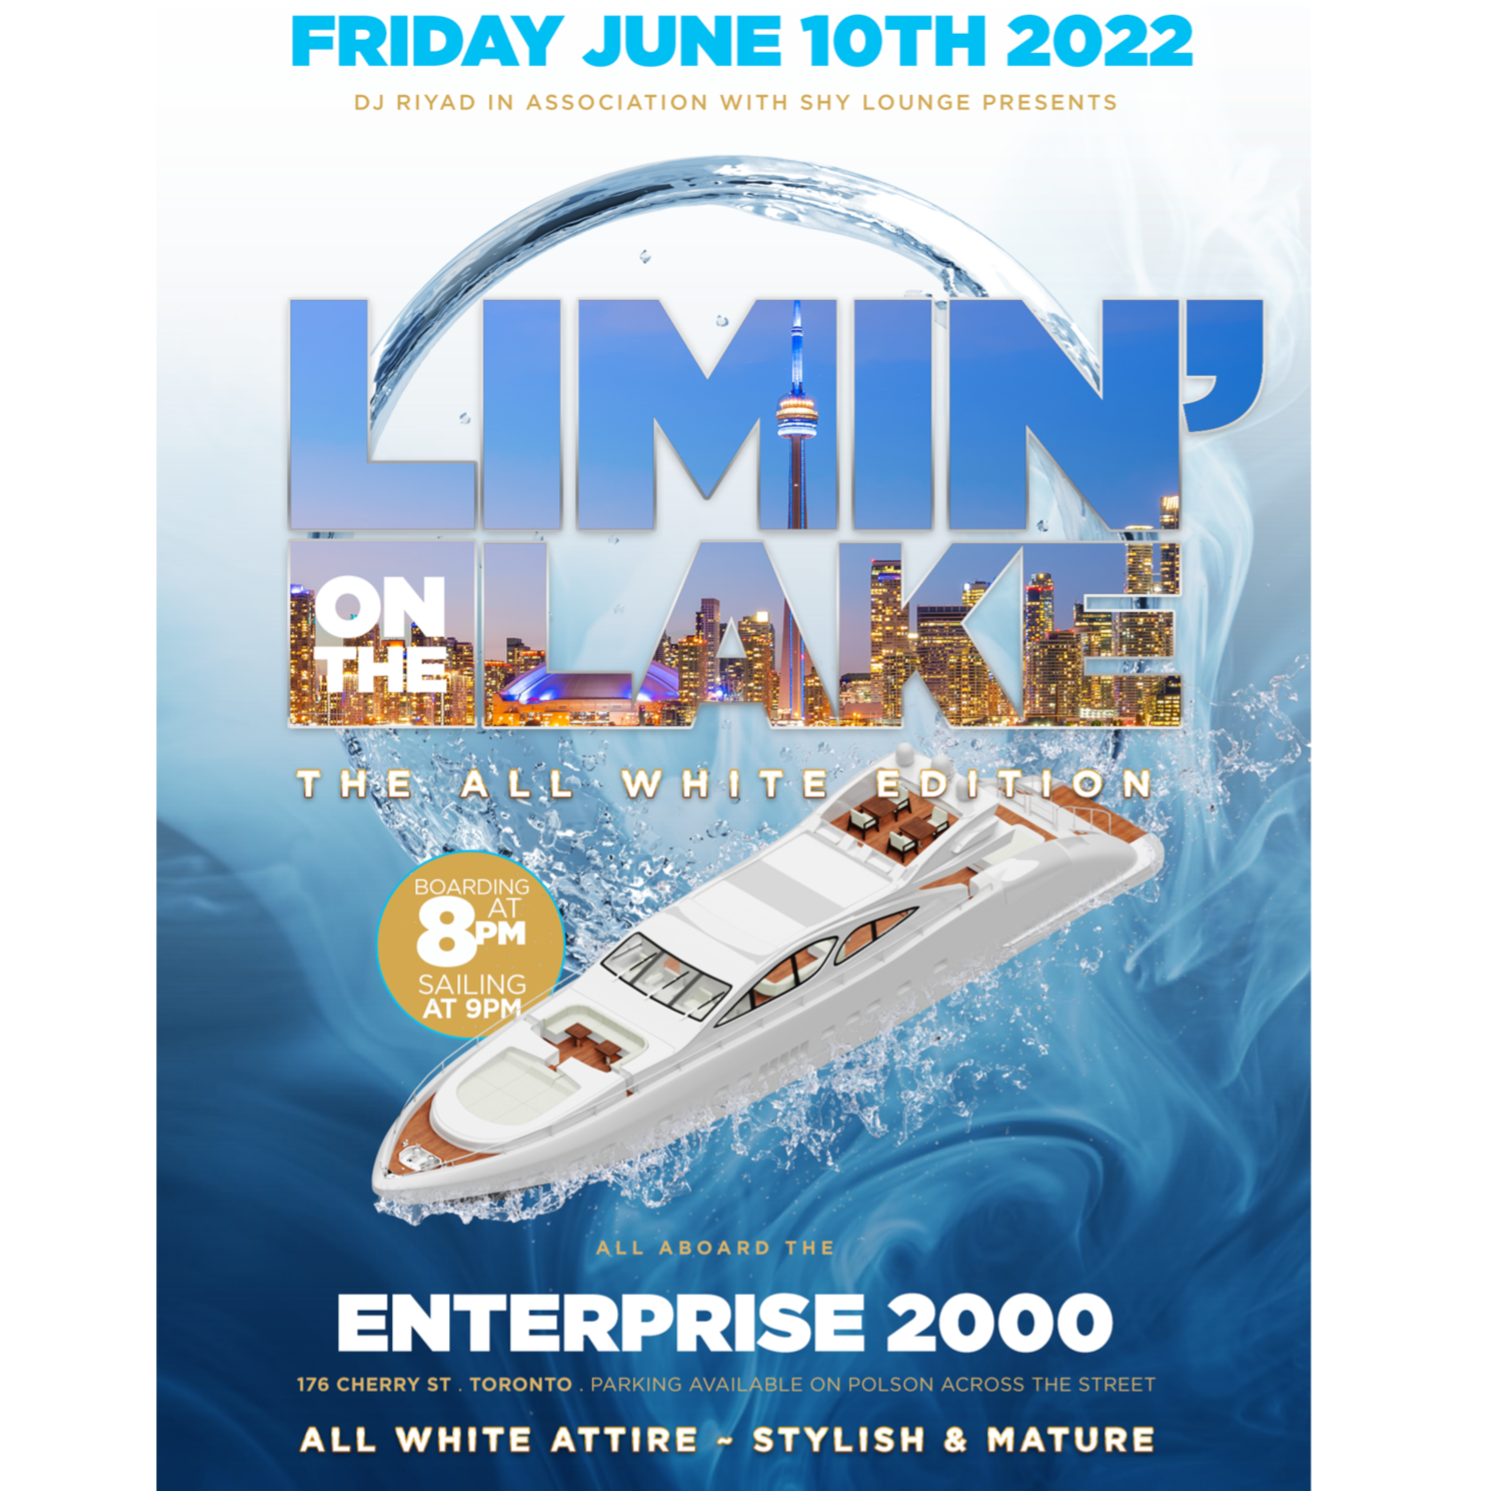 Limin On The Lake: The All White Edition